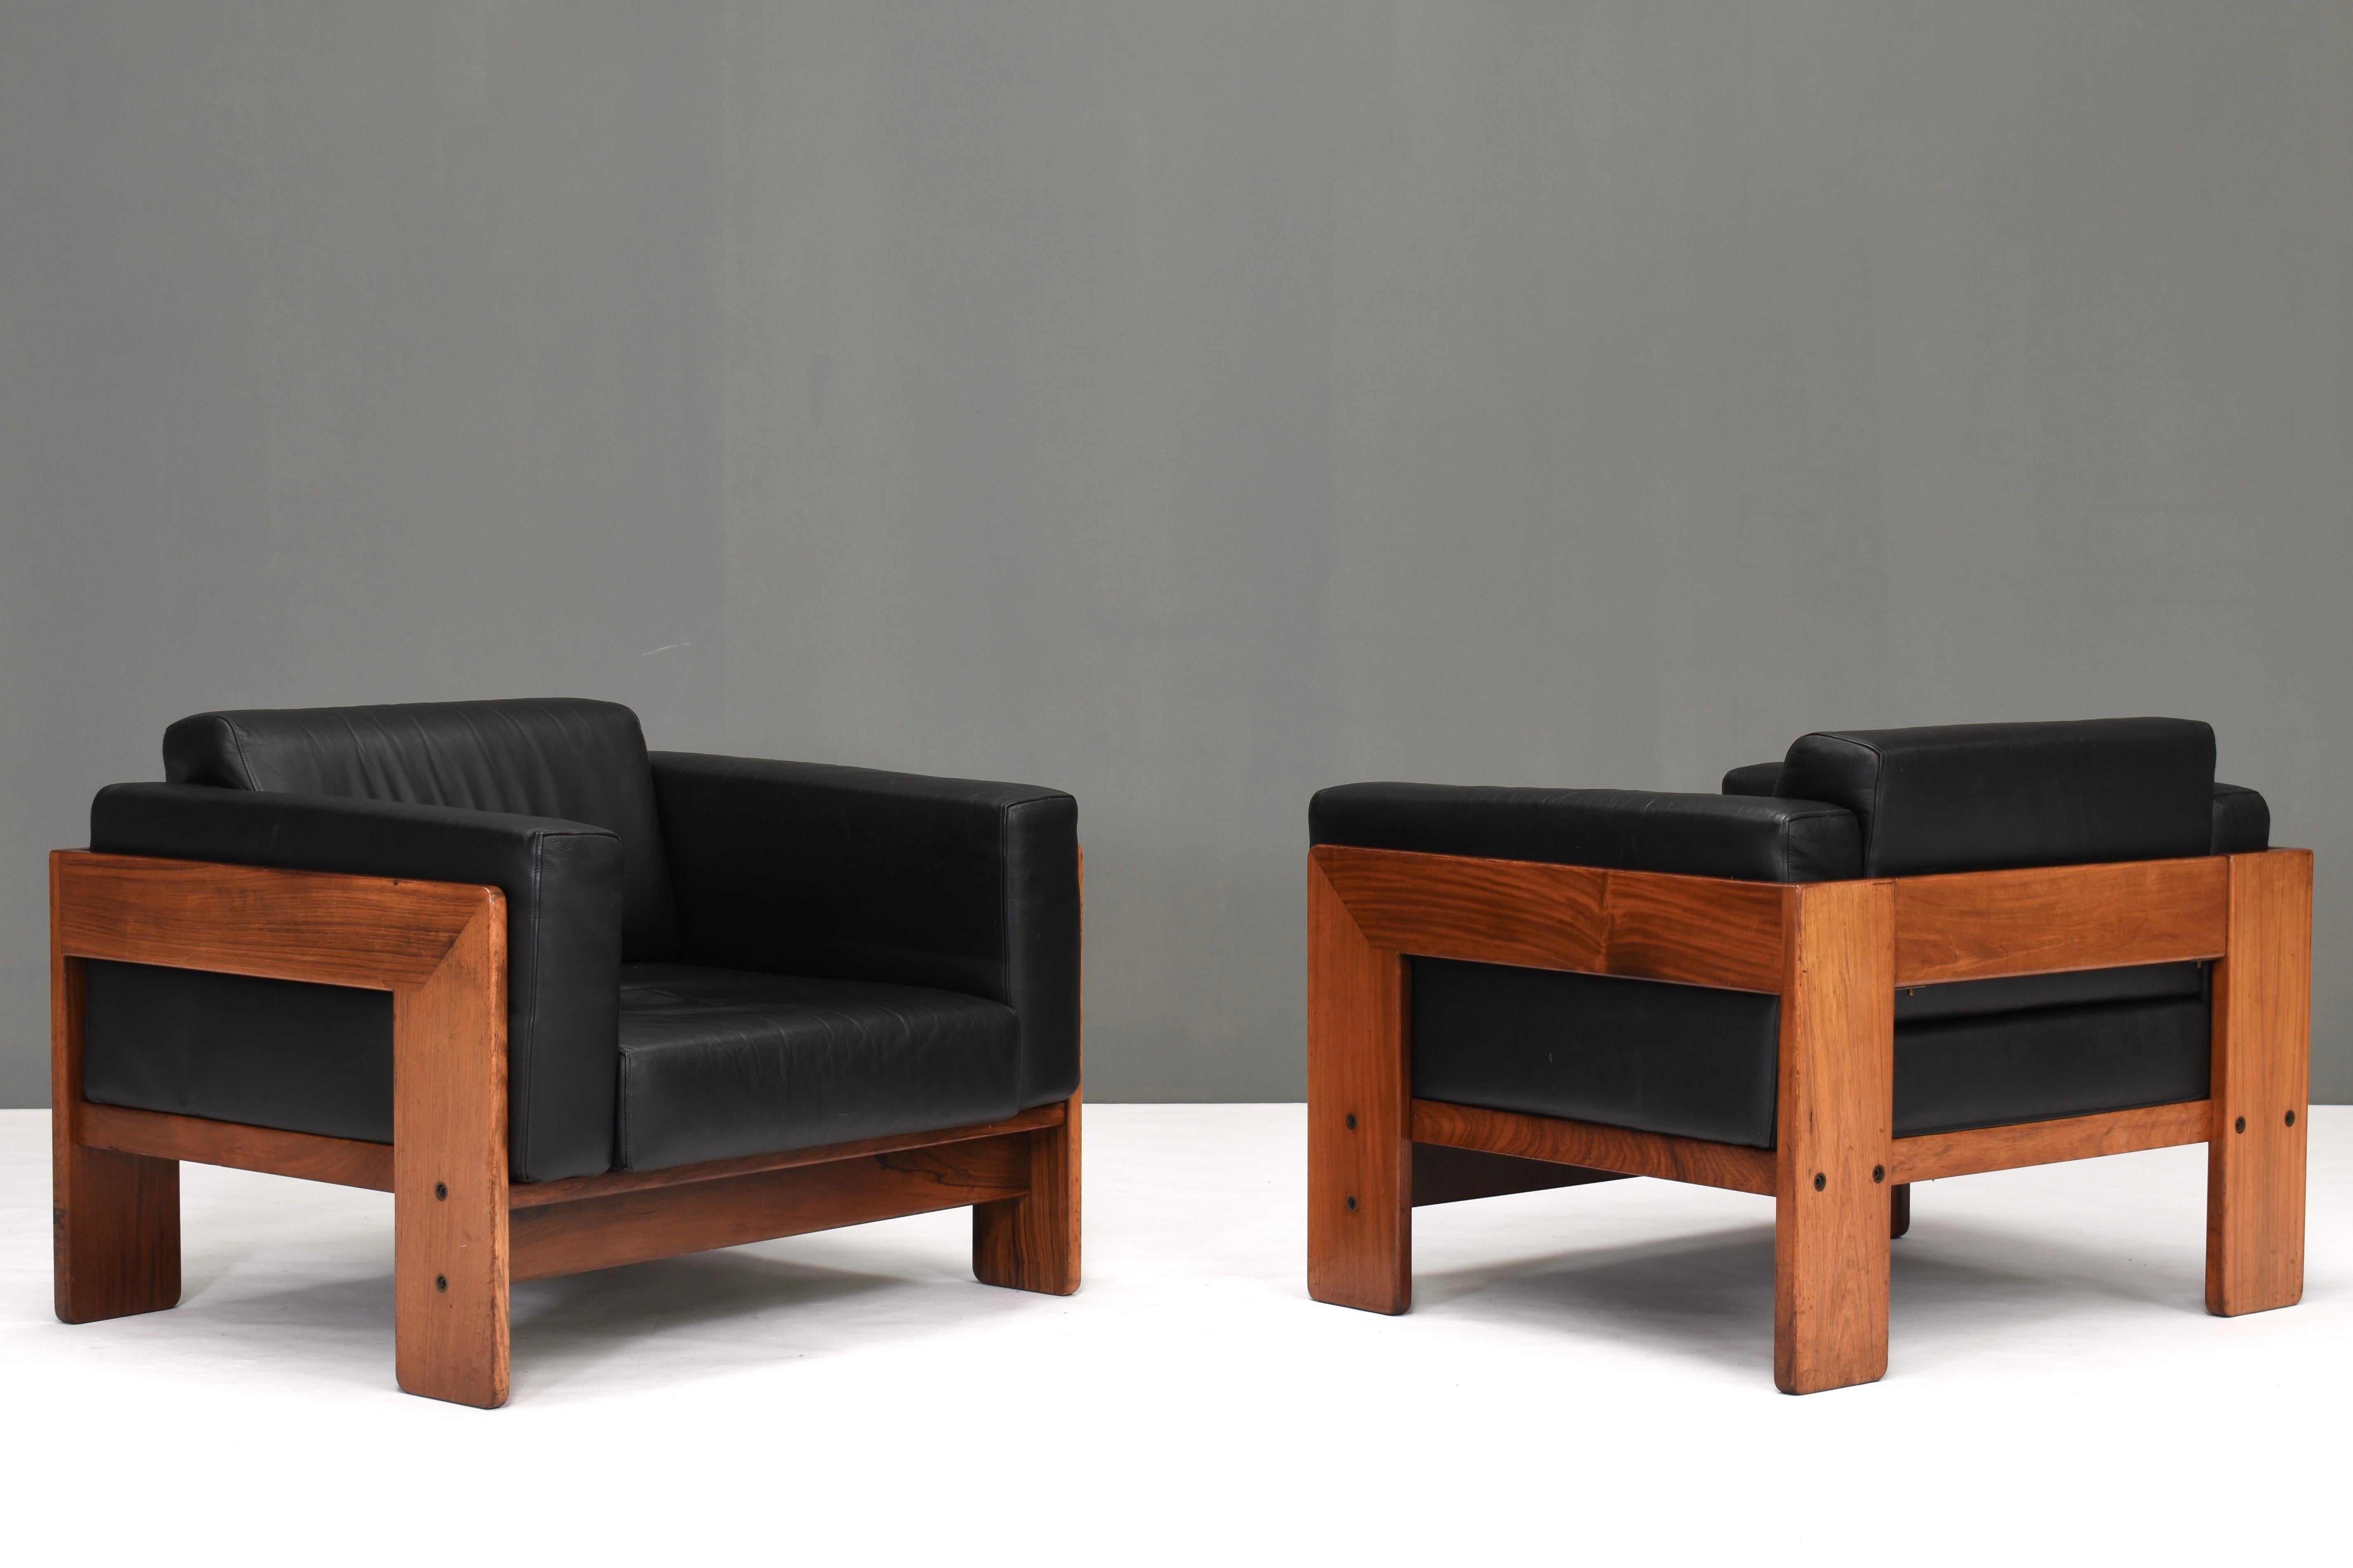 Early pair of black leather and Italian walnut lounge chairs by Afra and Tobia Scarpa for GAVINA – Italy, 1975.

These chairs are original Italian production by GAVINA. The chairs were also produced by KNOLL.

Both chairs are labeled on the base